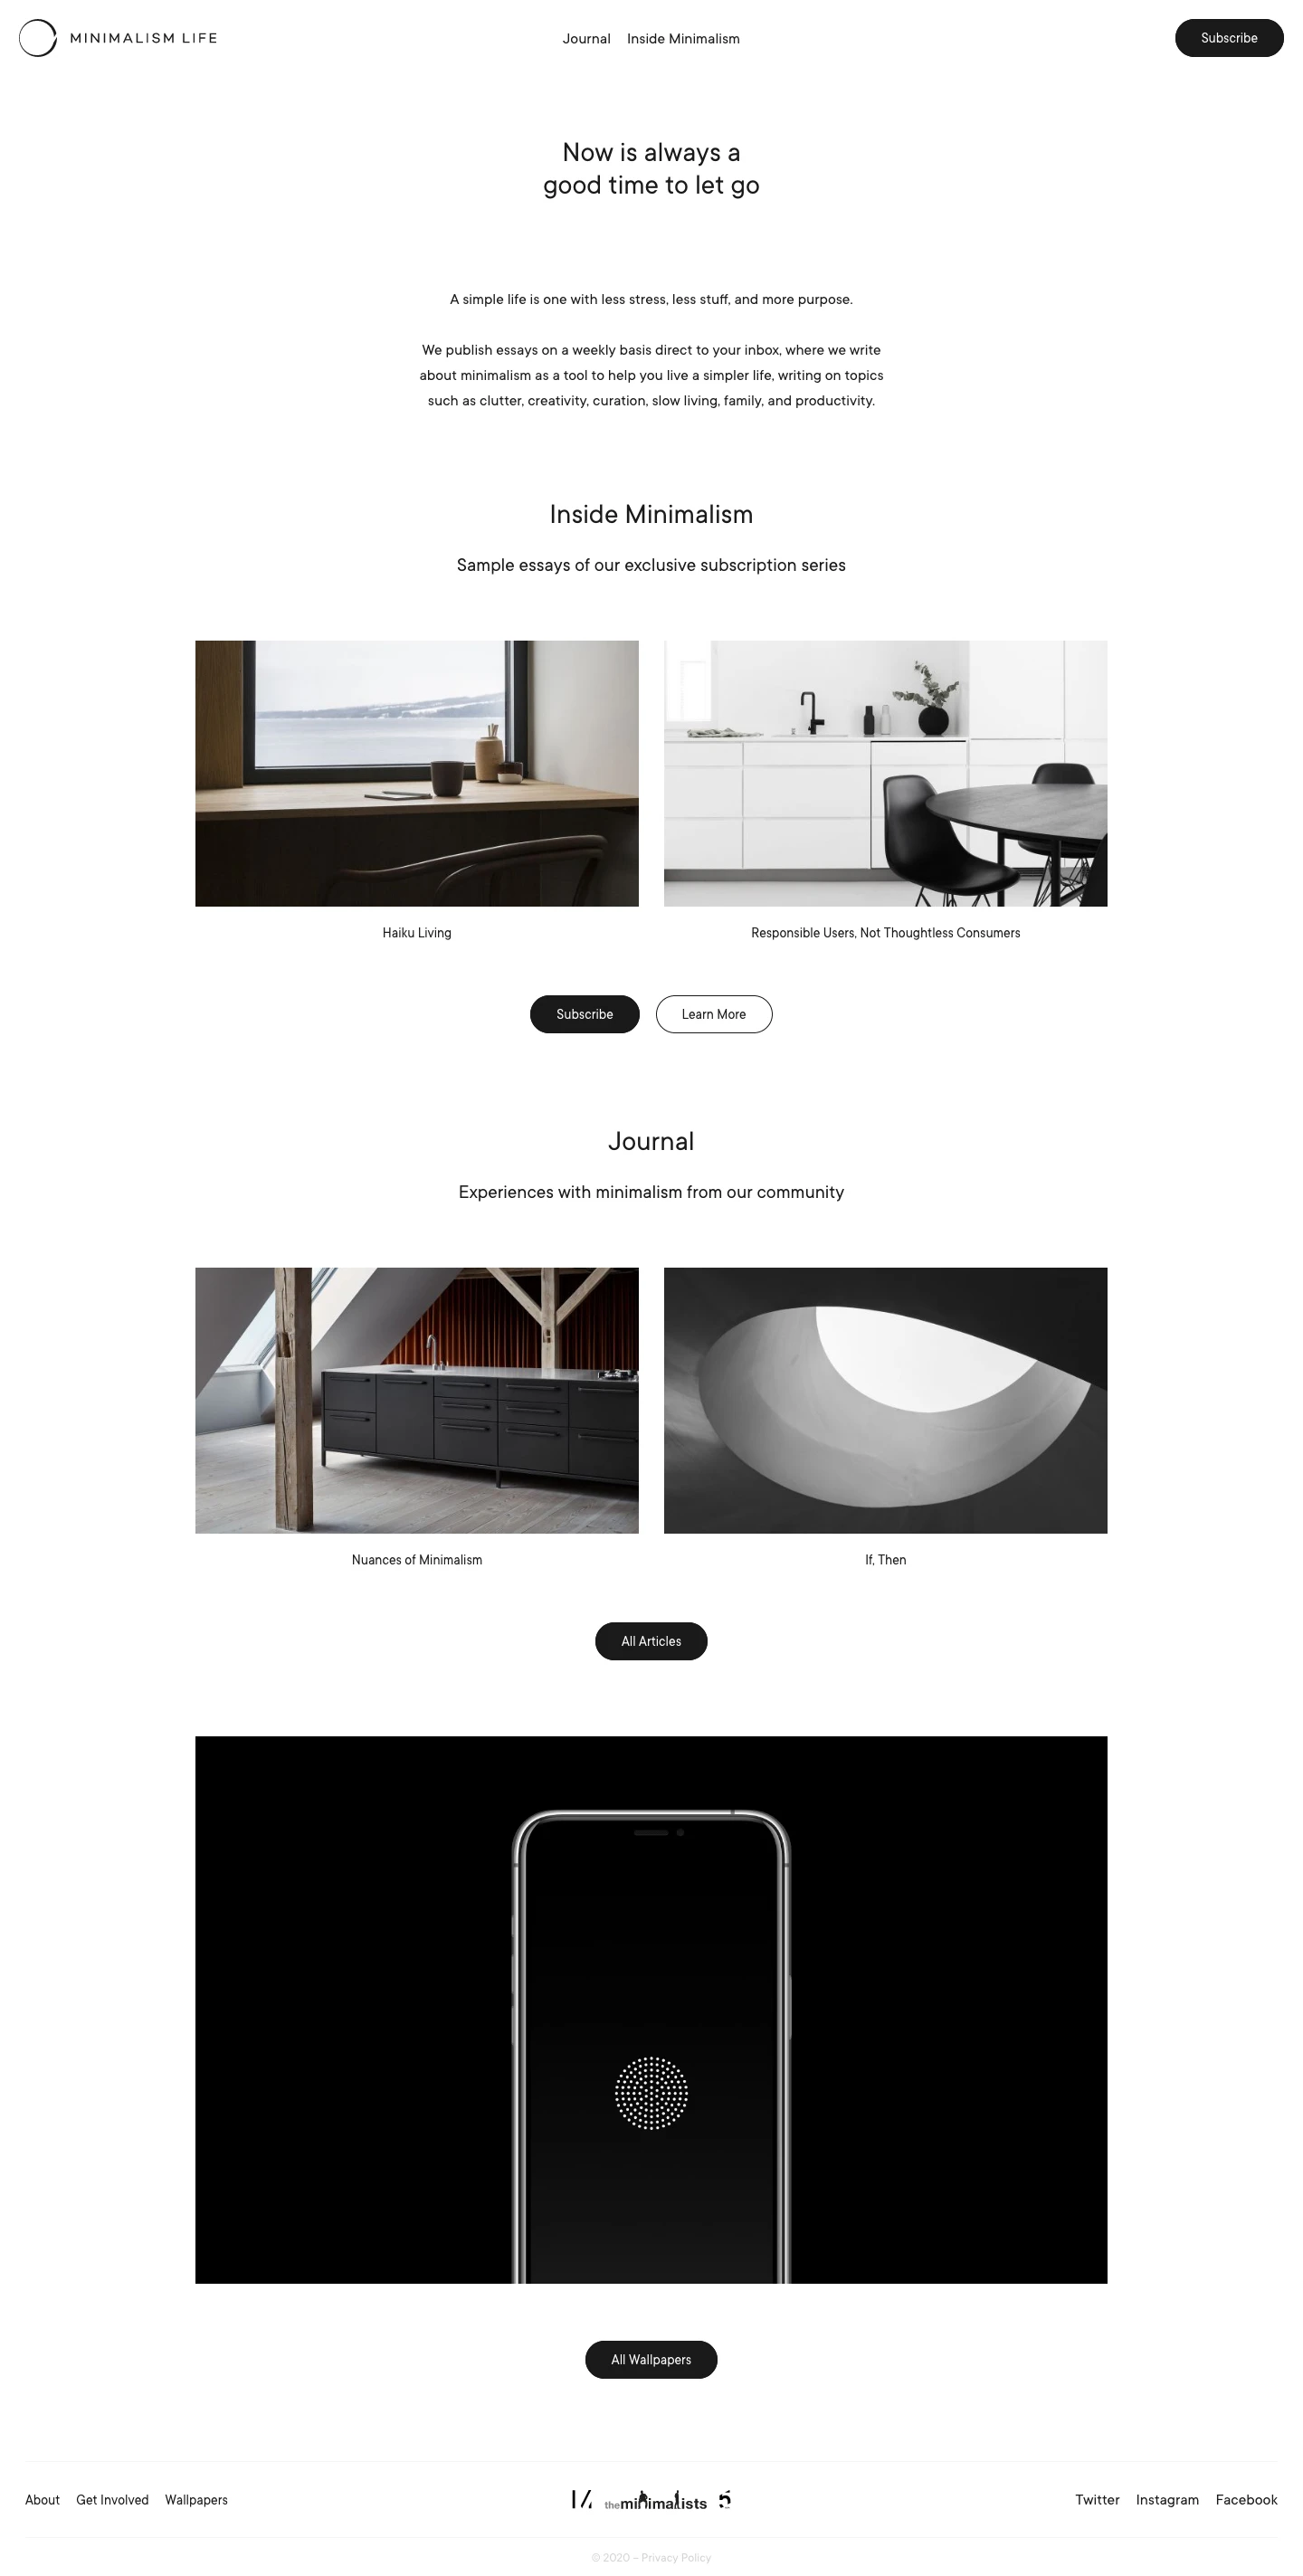 Minimalism Life  Landing Page Example: A simple life is one with less stress, less stuff, and more purpose. We want to provide you with the ingredients to live a more focused, healthier.